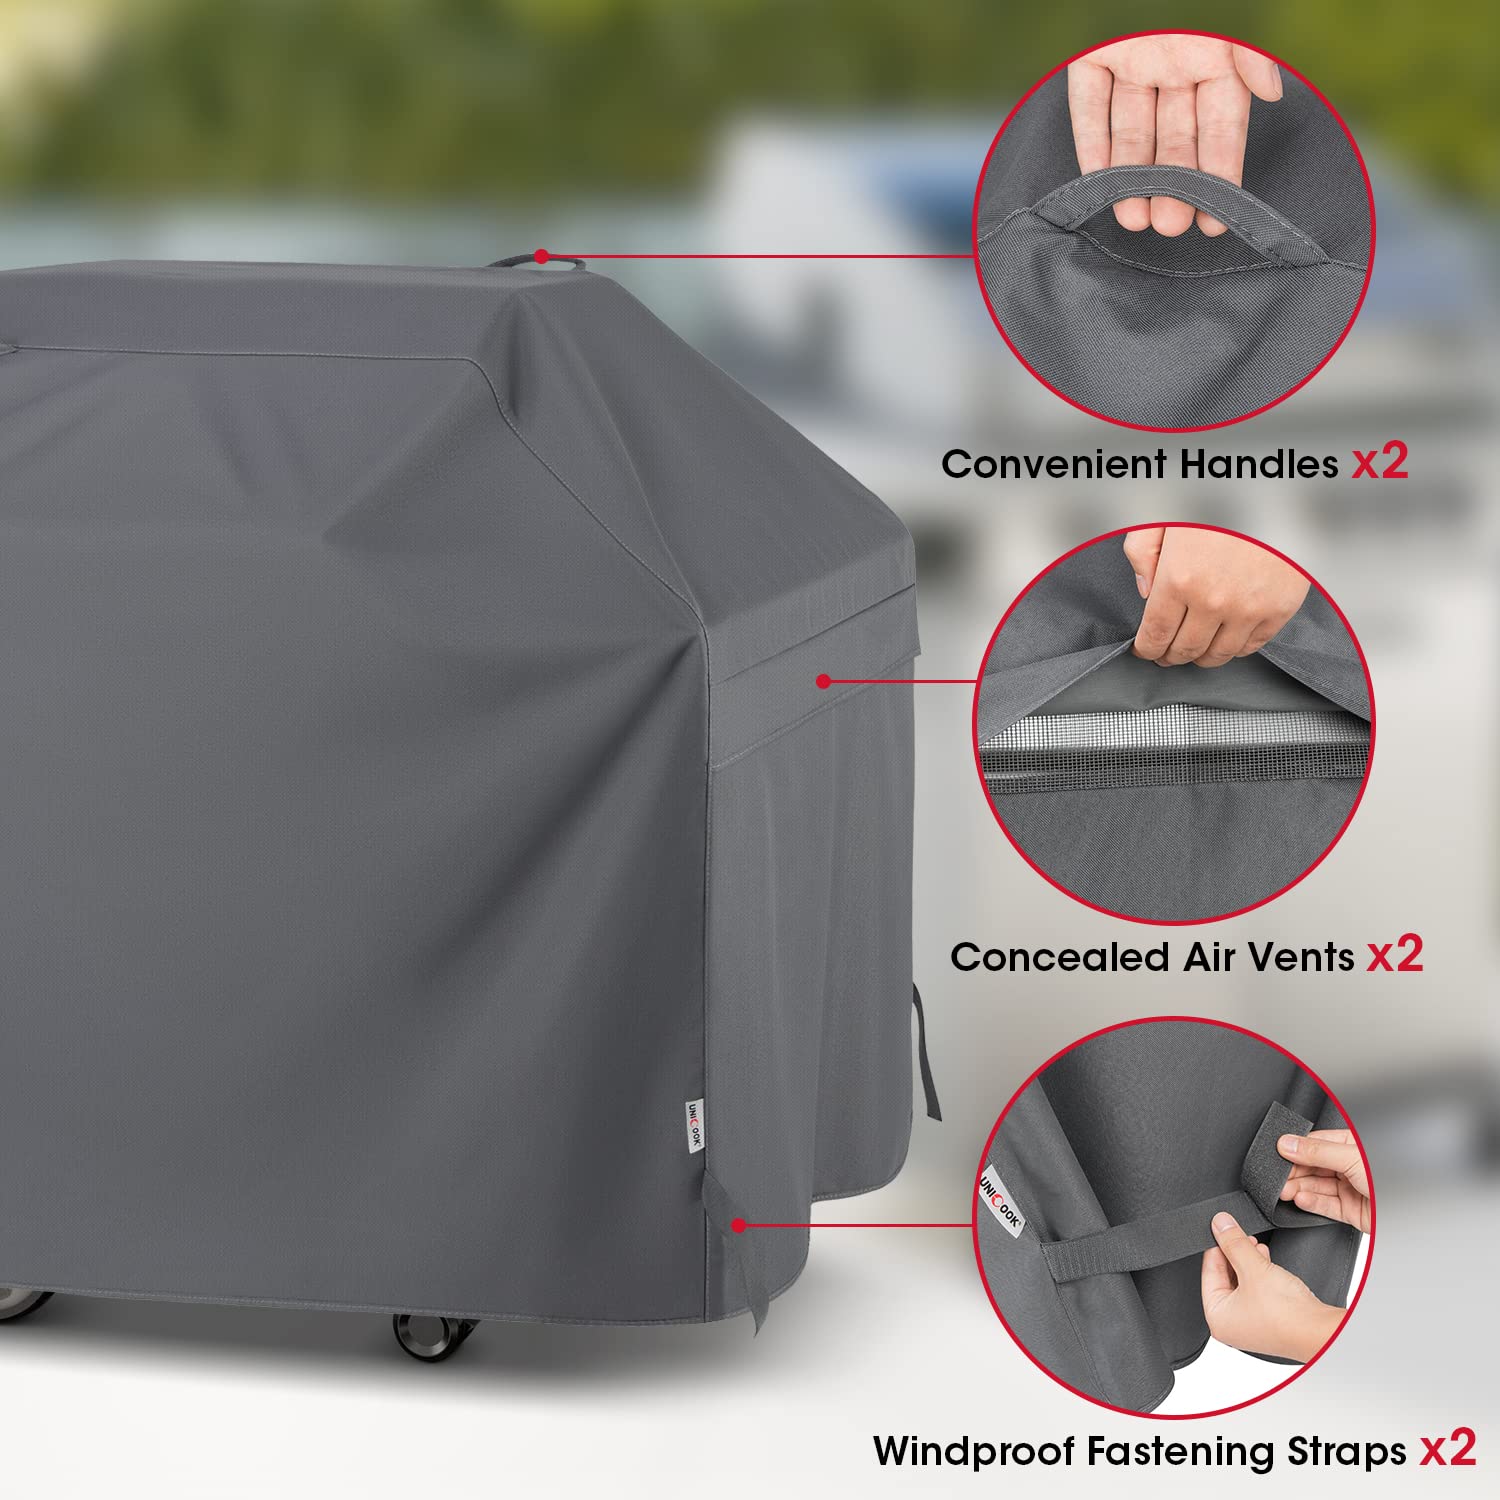 Unicook 50 Inch grill cover for Outdoor grill, 2-3 Burner BBQ grill cover for 48 Inch Weber charbroil grills, Heavy Duty Waterpr